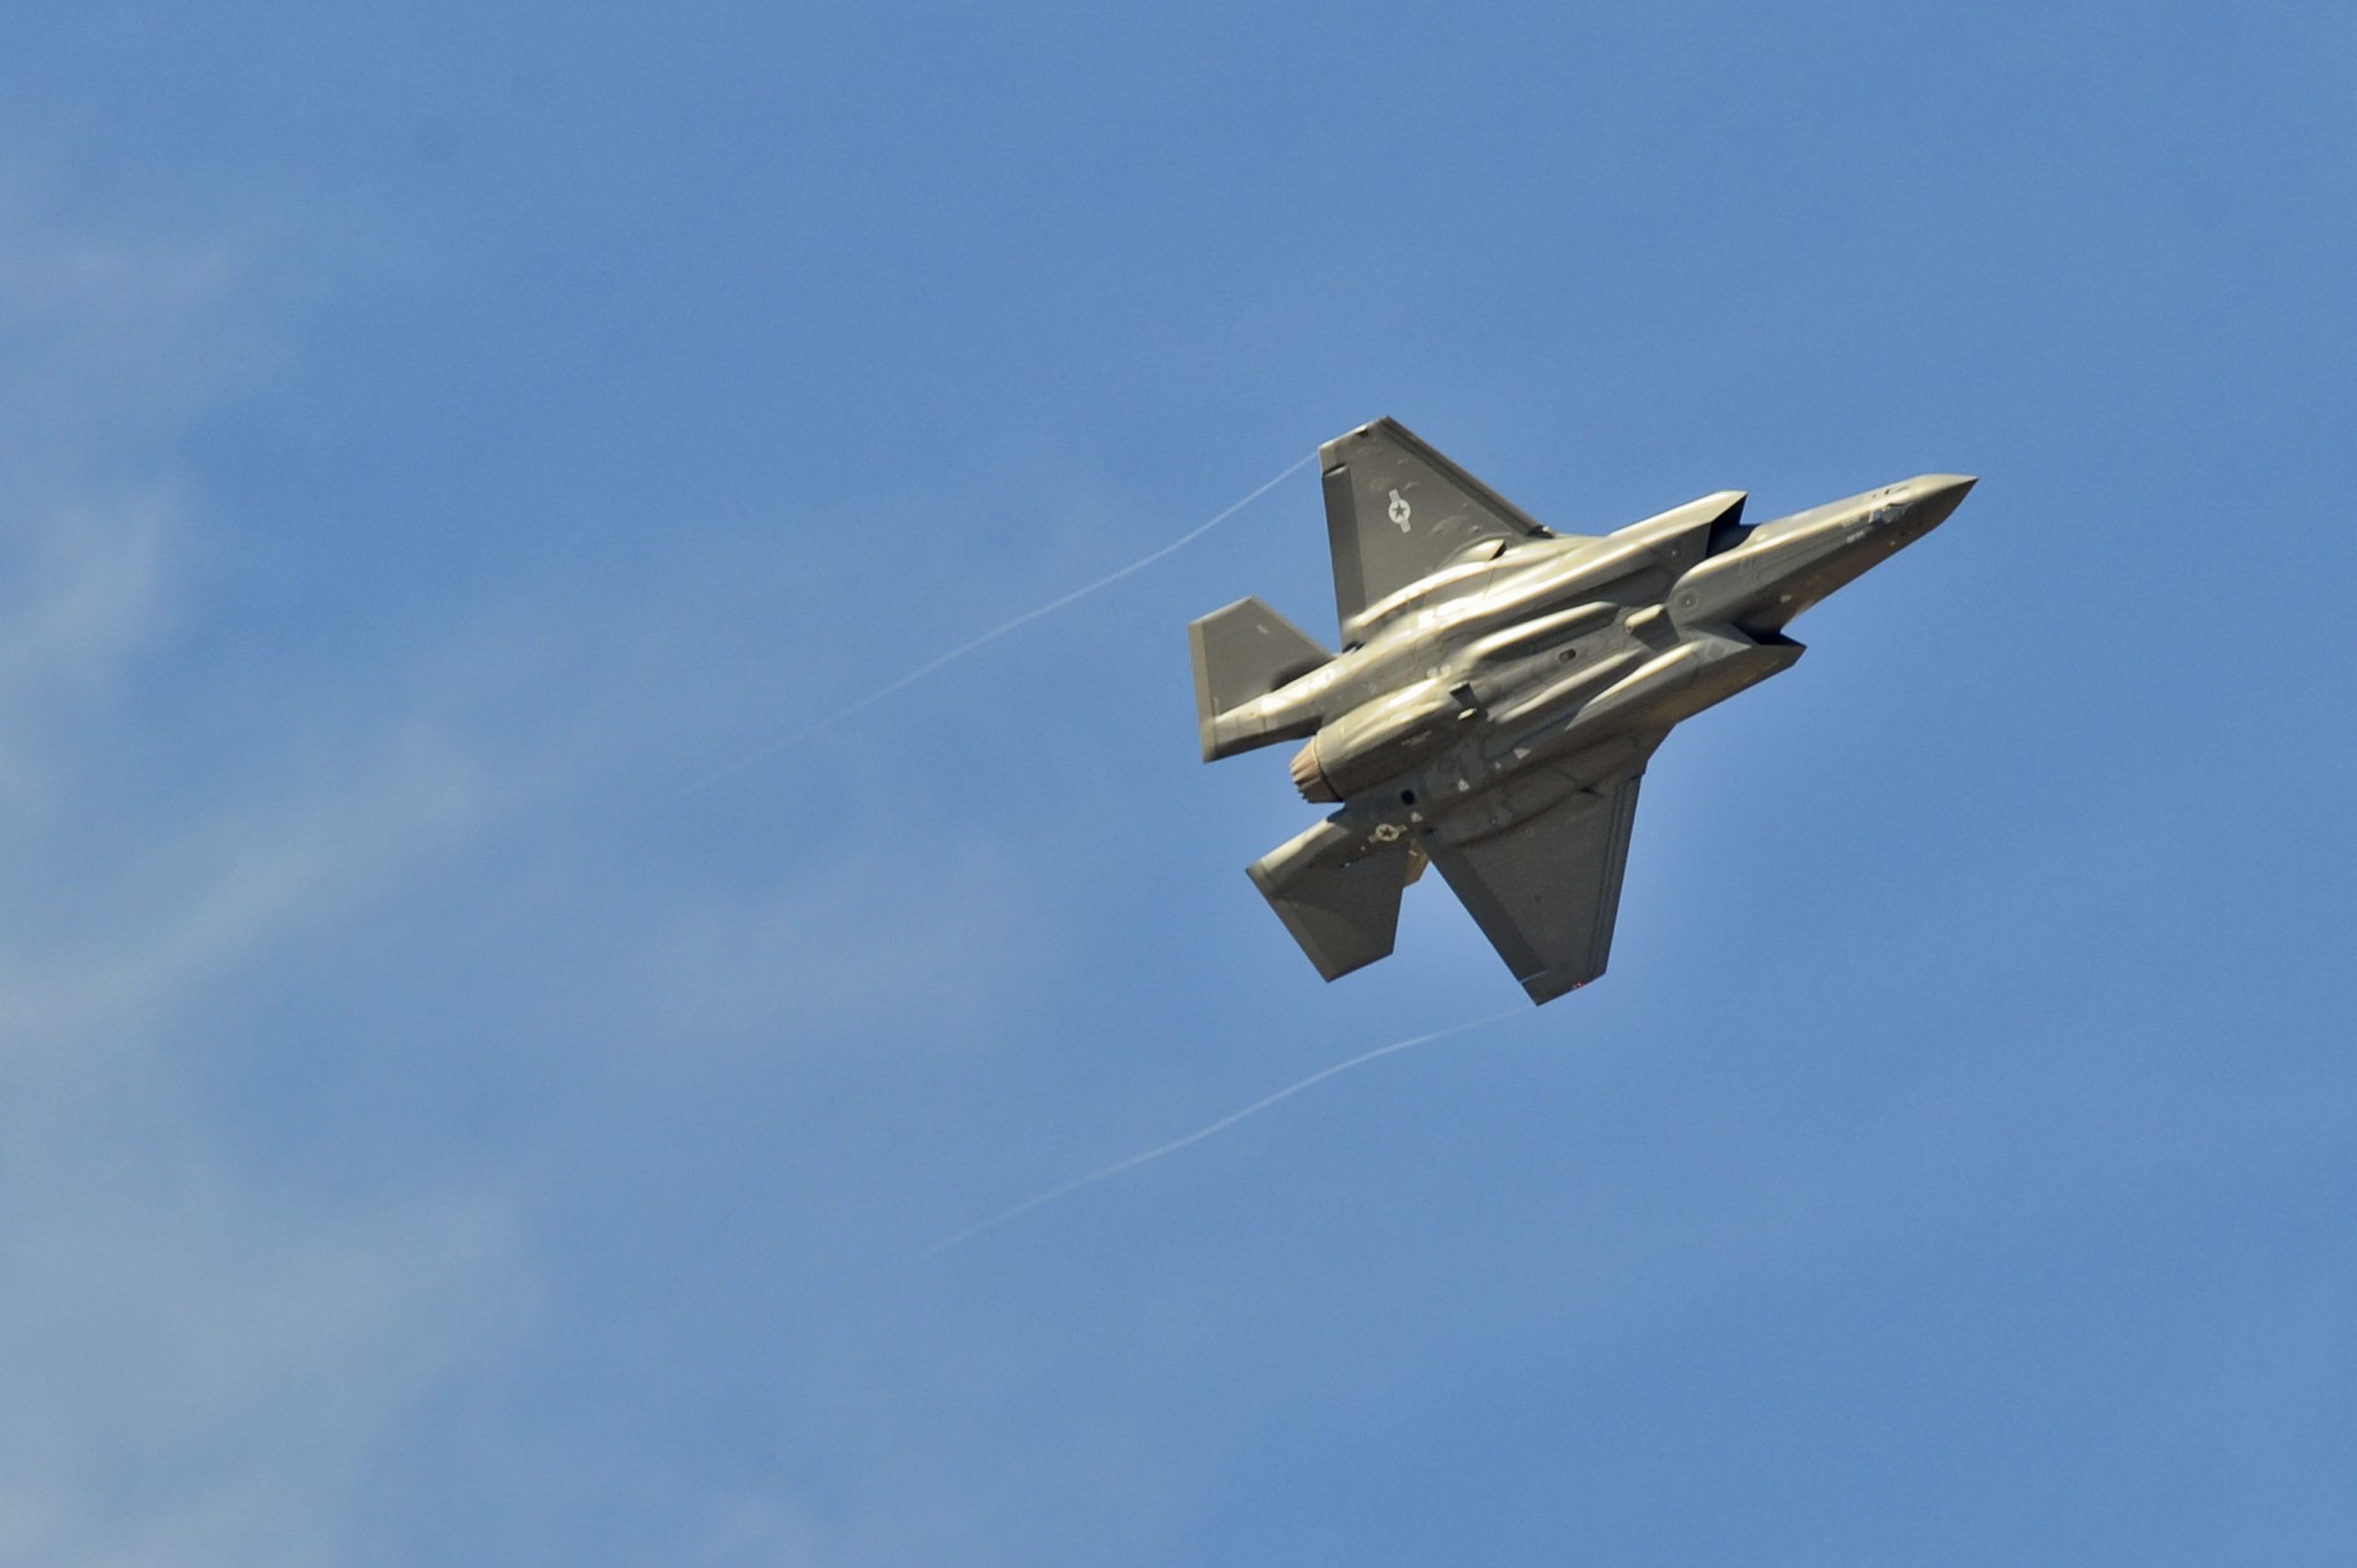 US and Turkey to Hold Second Round of Talks on F-35 Fighter Program